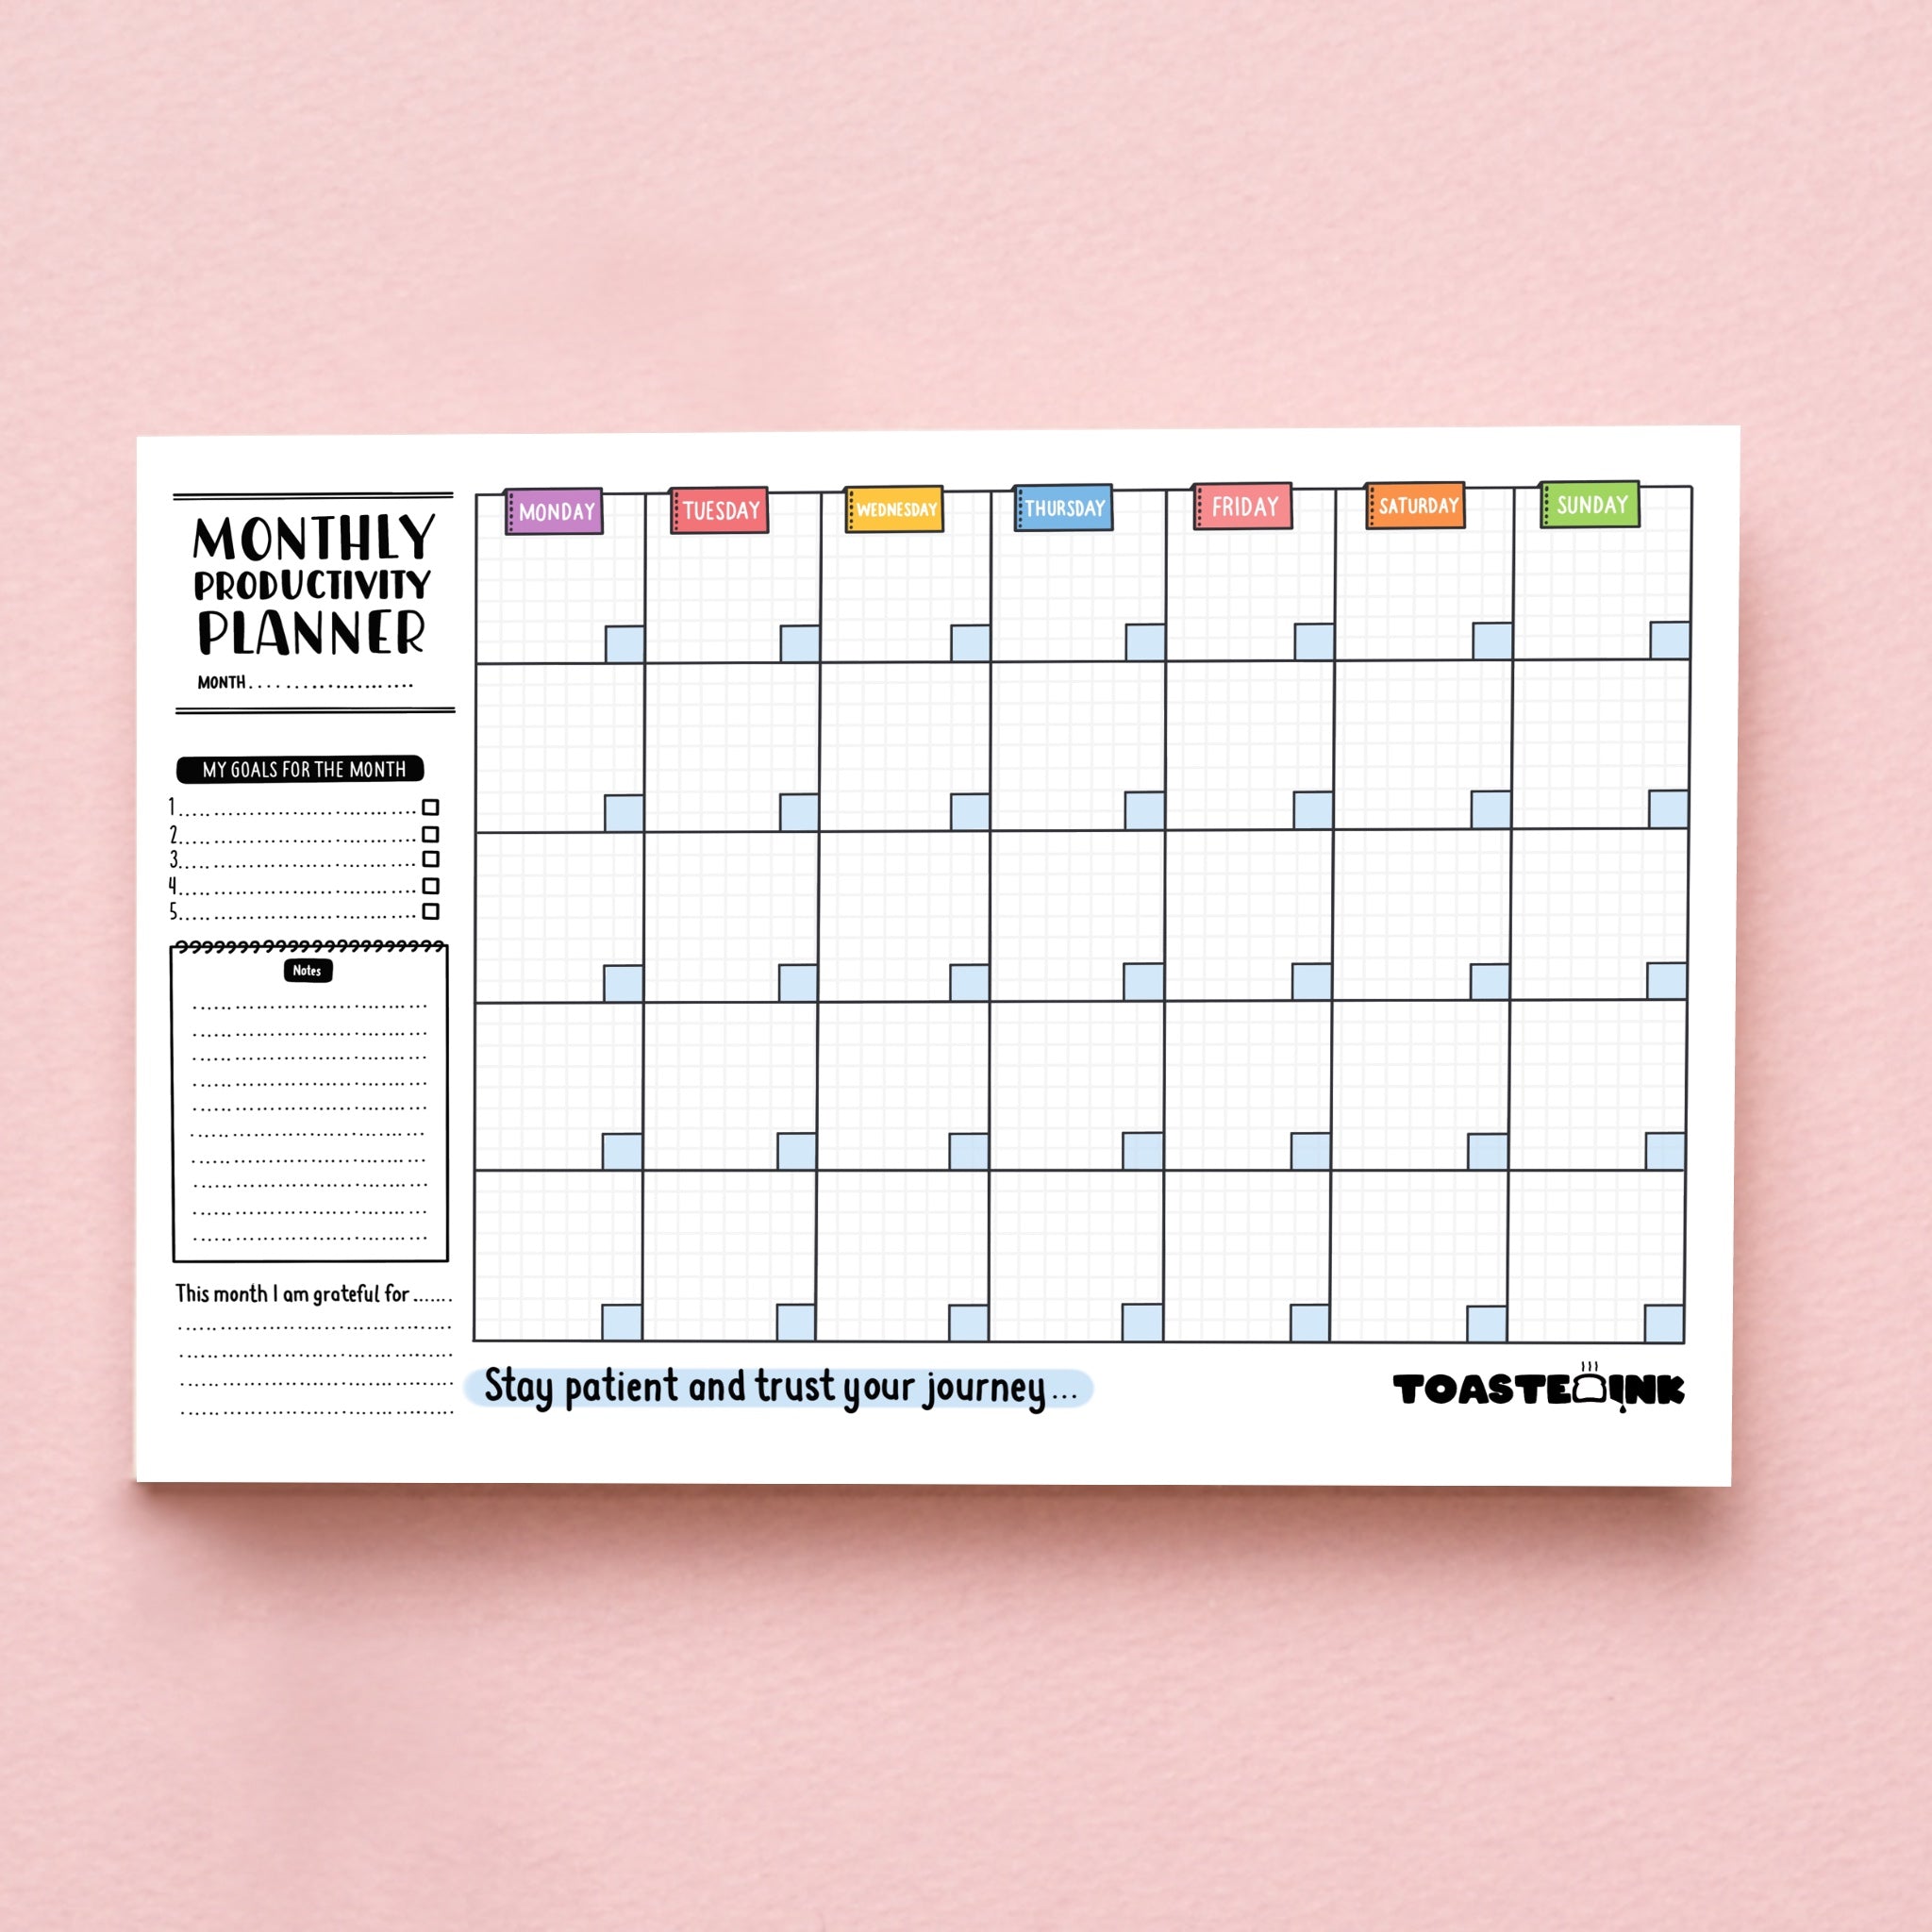 Monthly planner on pink background